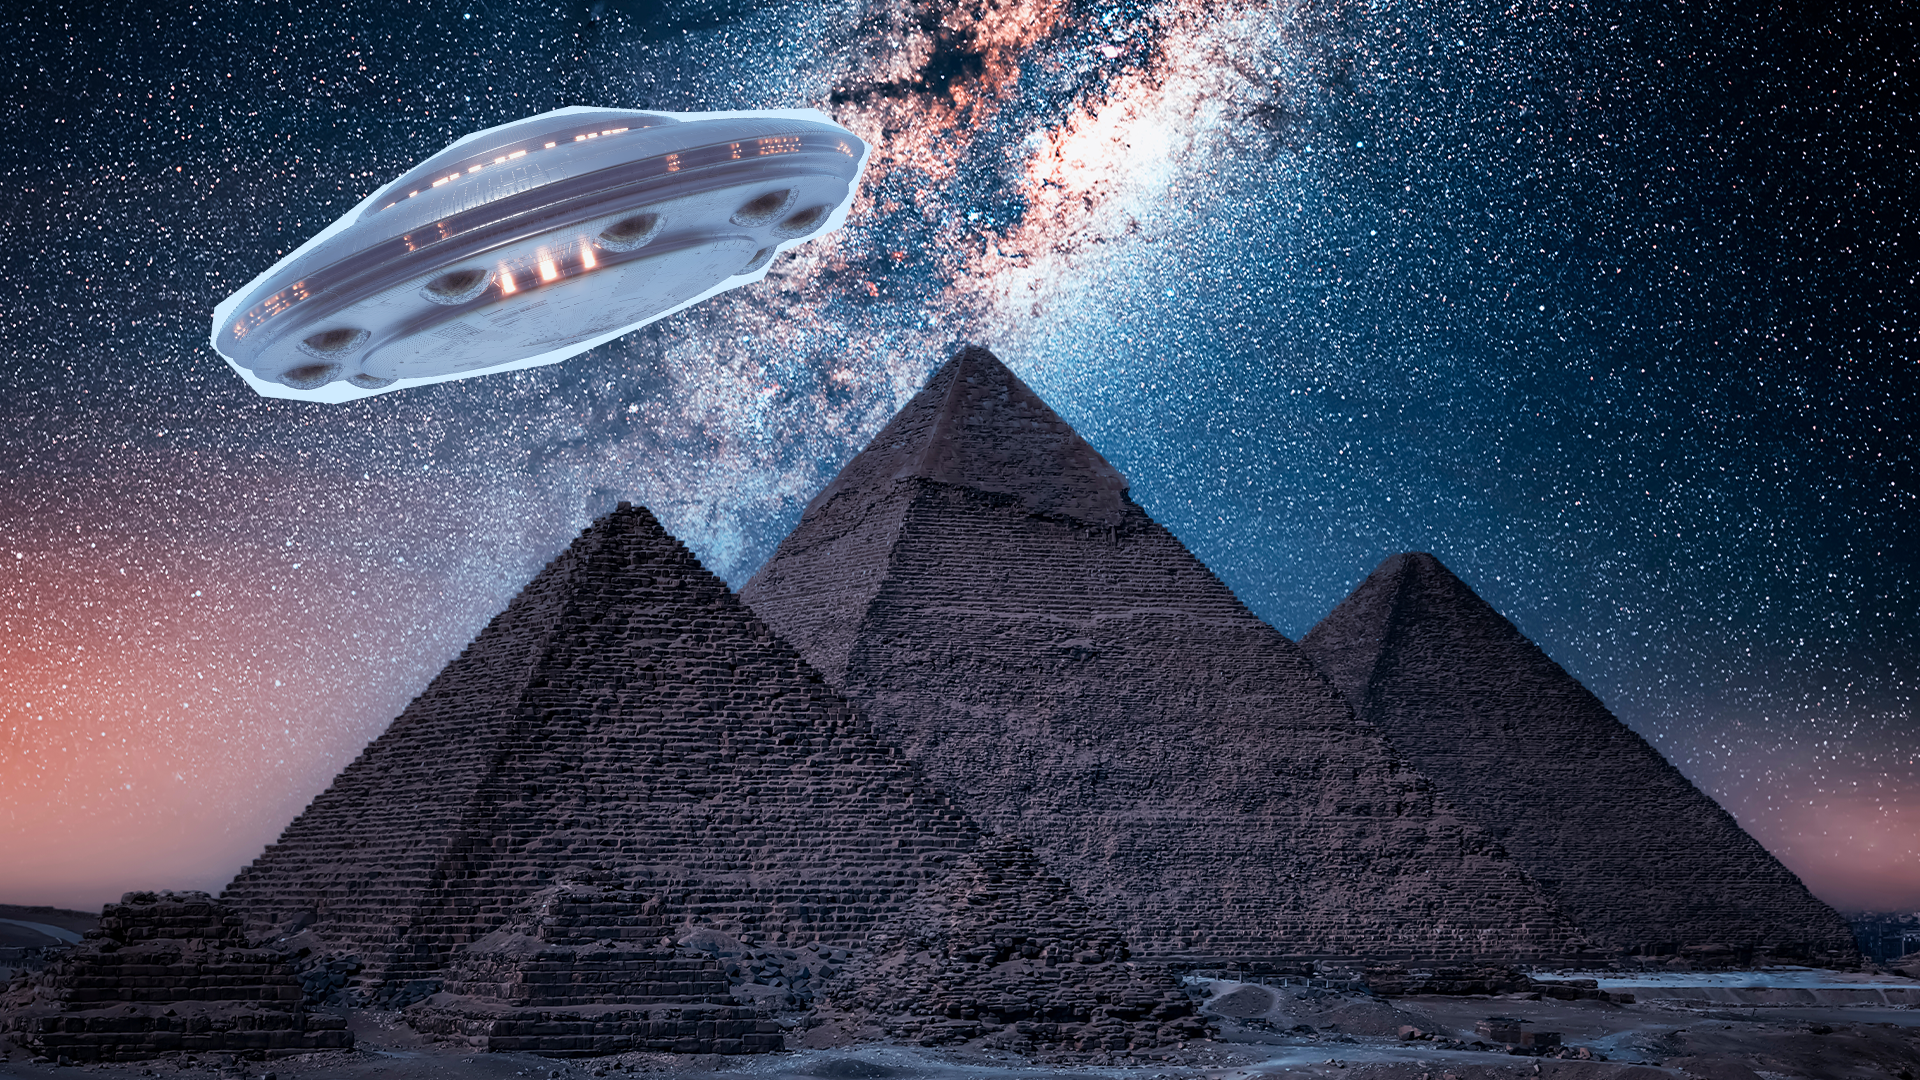 A flying suacer over the pyramids